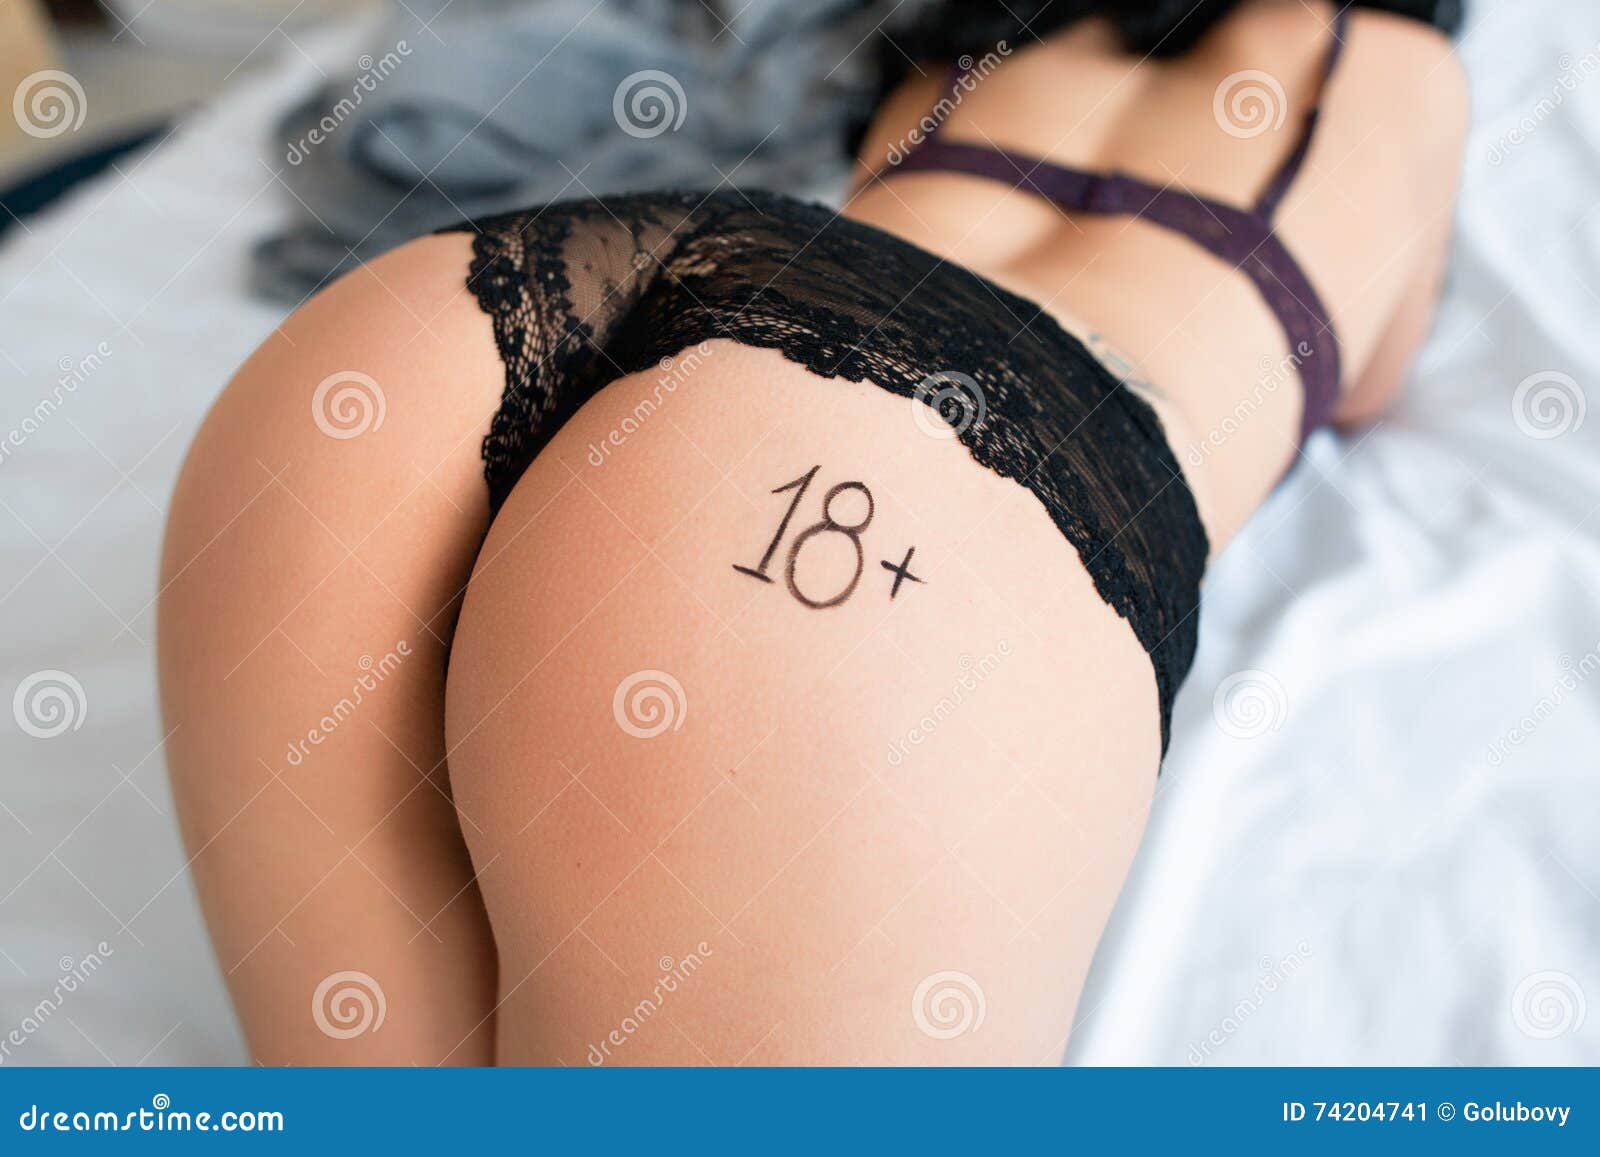 Bending Woman in Bed with Label 18plus on Stock Image photo photo